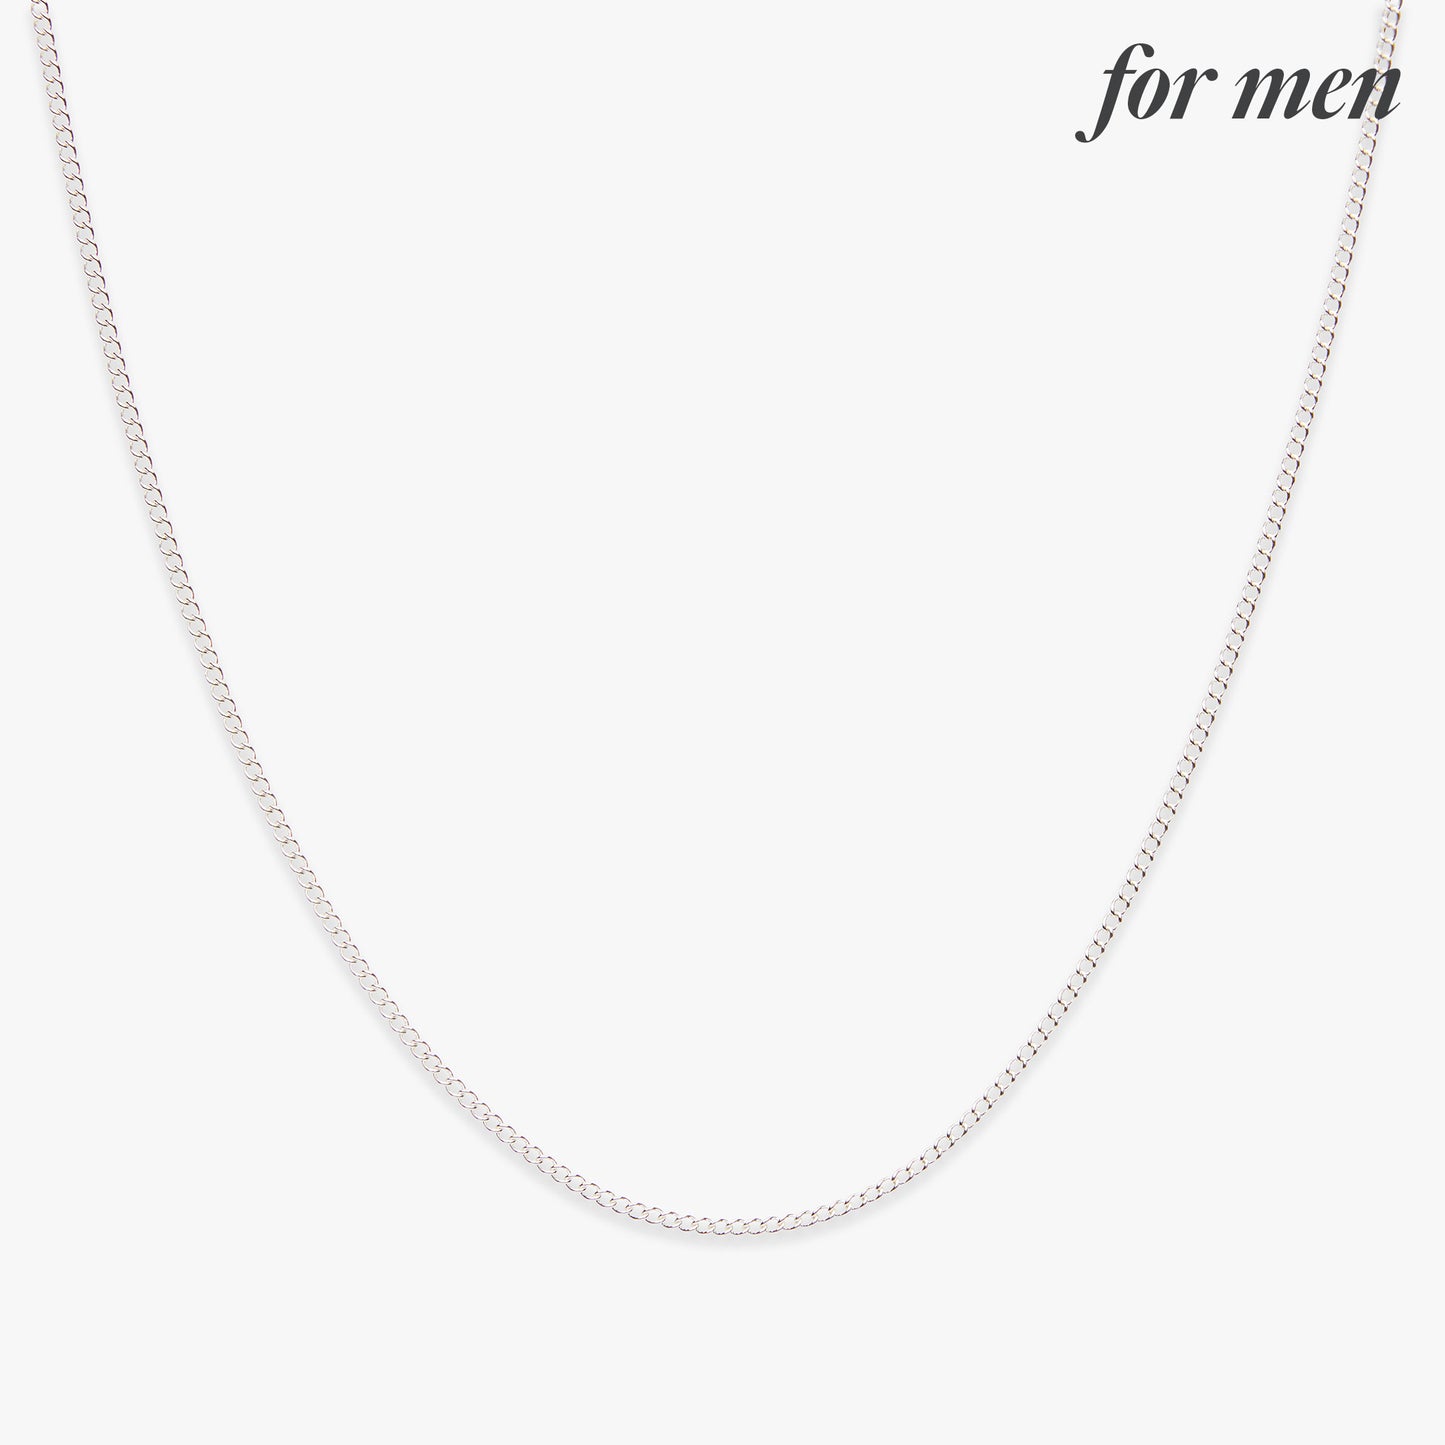 Large curb chain ketting zilver voor mannen